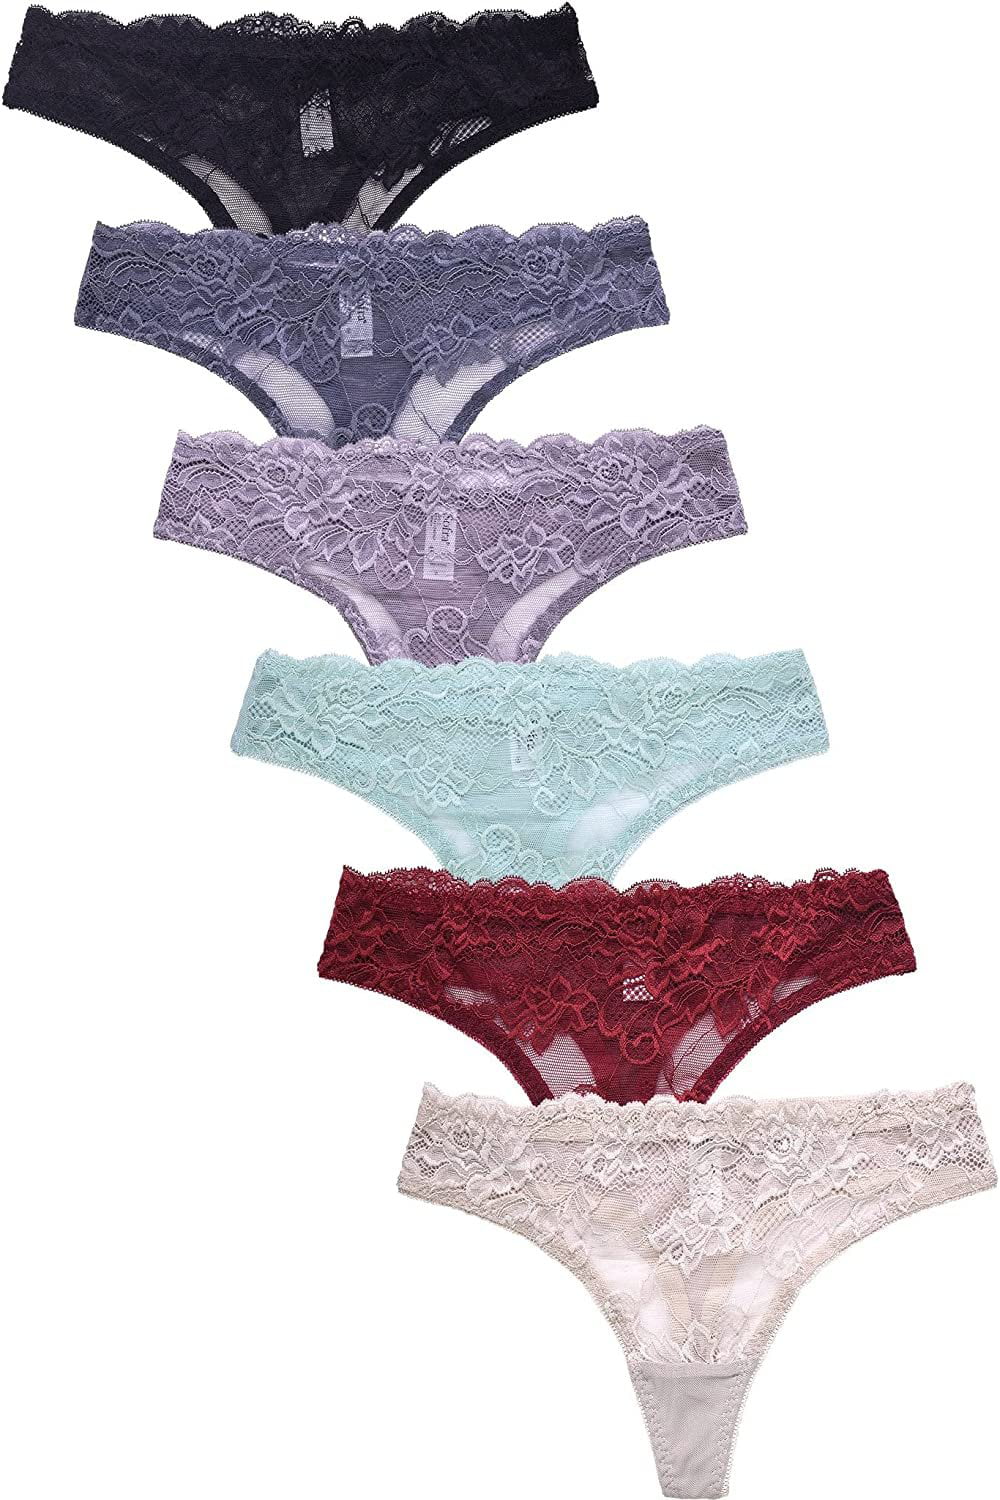 Women's Soft Cotton Lace No Show Thong Panty Pack of 12 - Various